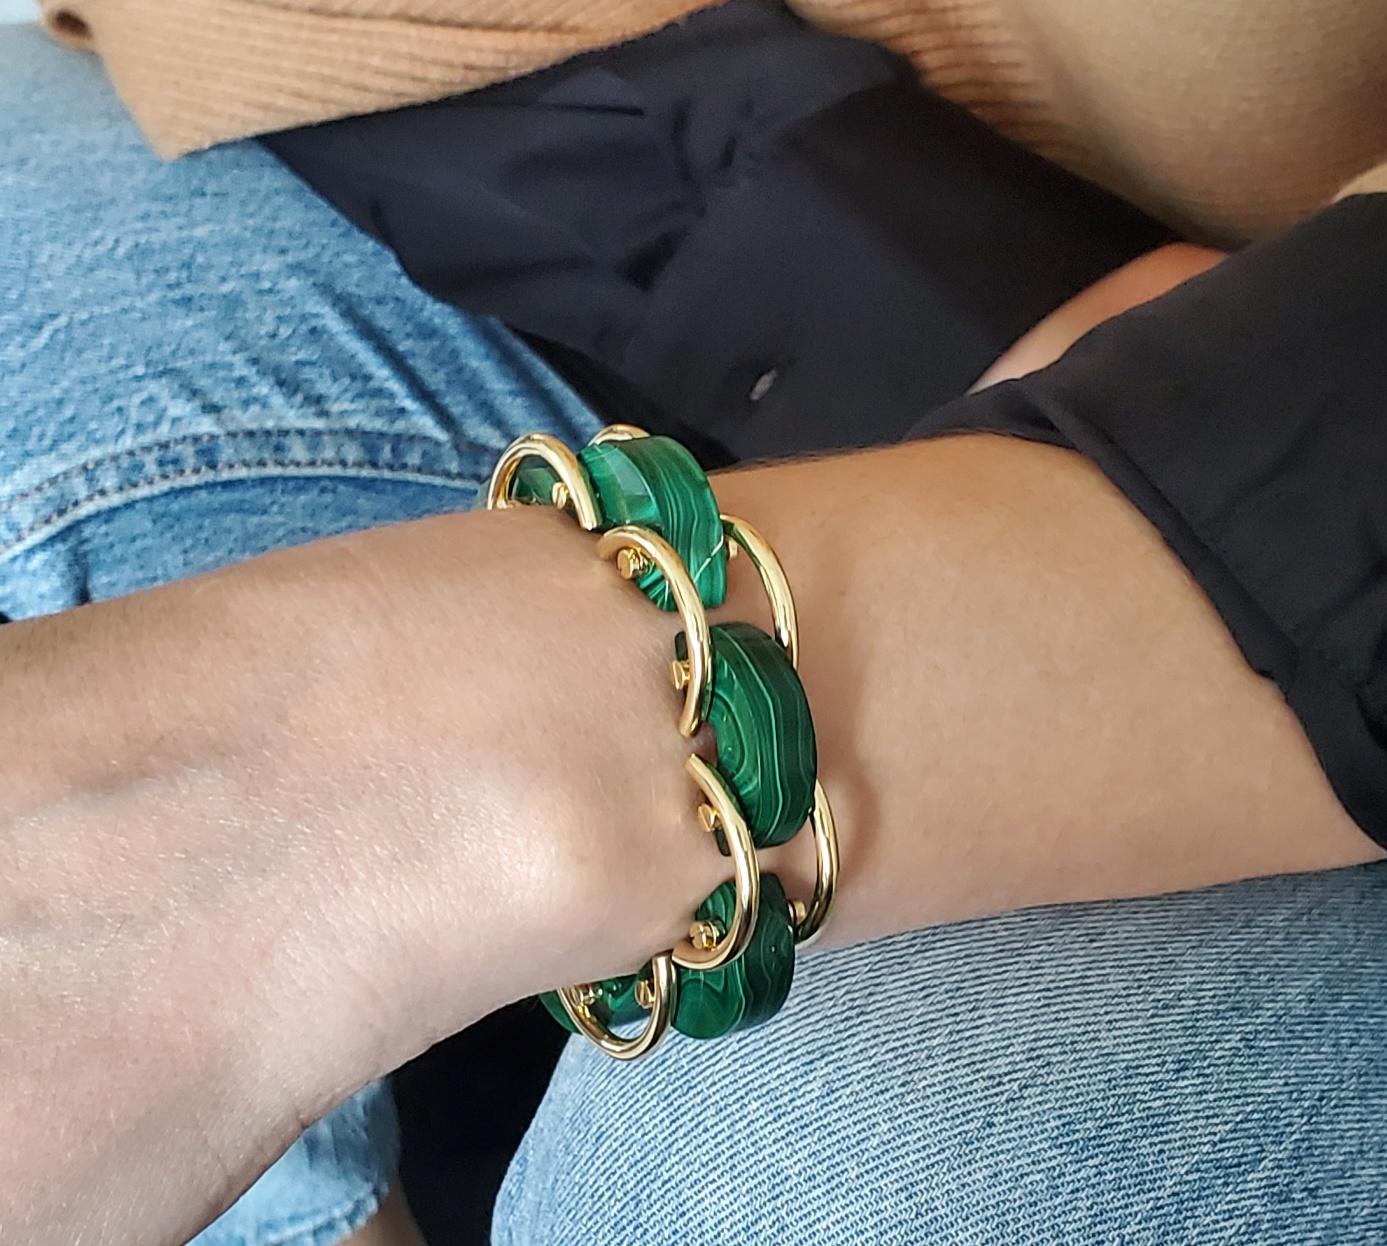 Geometric bracelet designed by the Aletto Brothers.

A contemporary masterpiece of geometric design. This fabulous flexible links bracelet was created by the jewelry designers Aletto Brothers and are part of the new malachite collection. It was